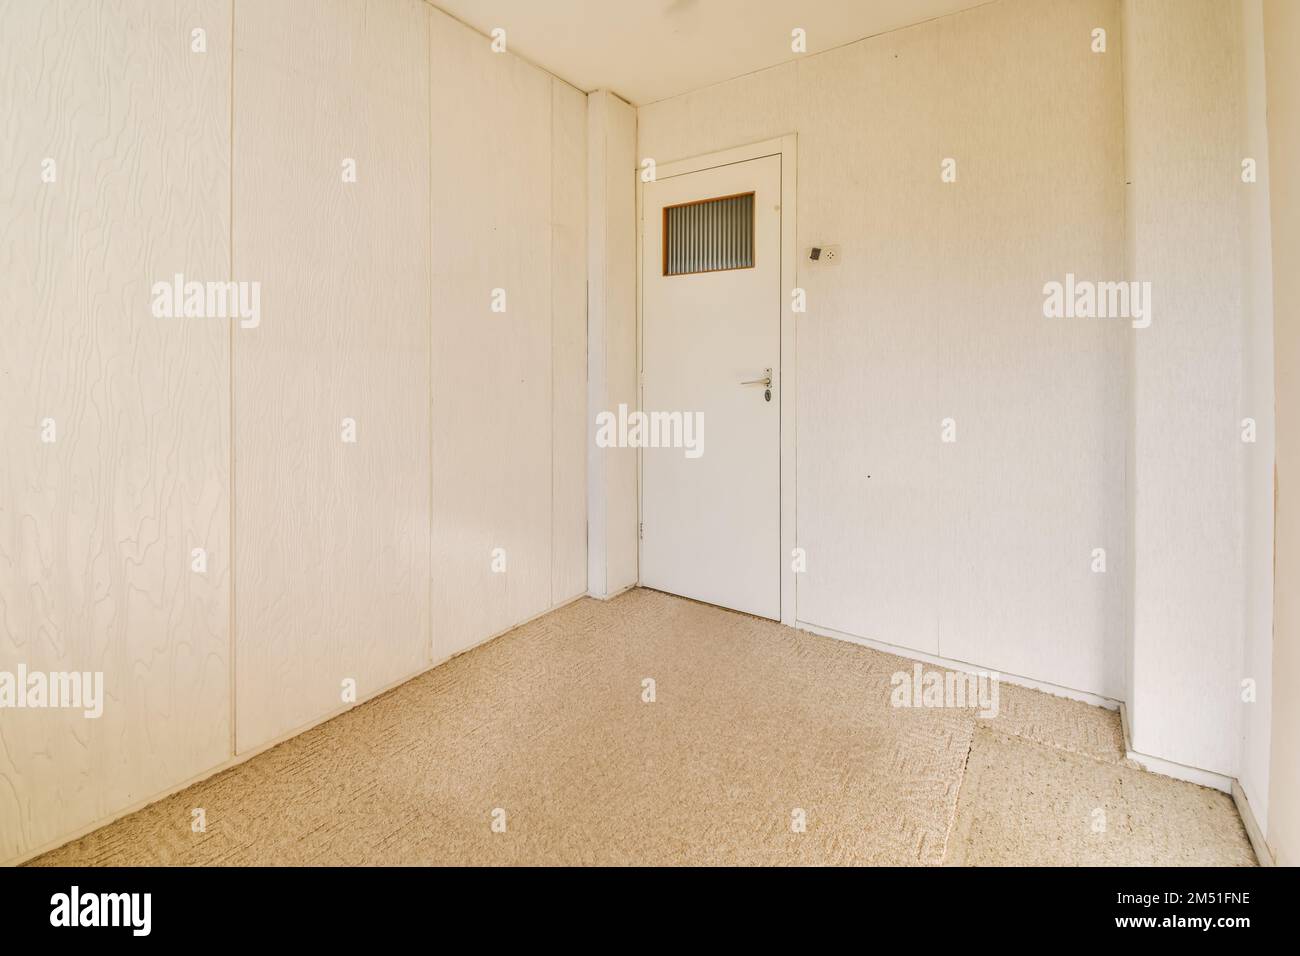 an empty room with white walls and wood paneled doors on either side of the room, one door is open Stock Photo